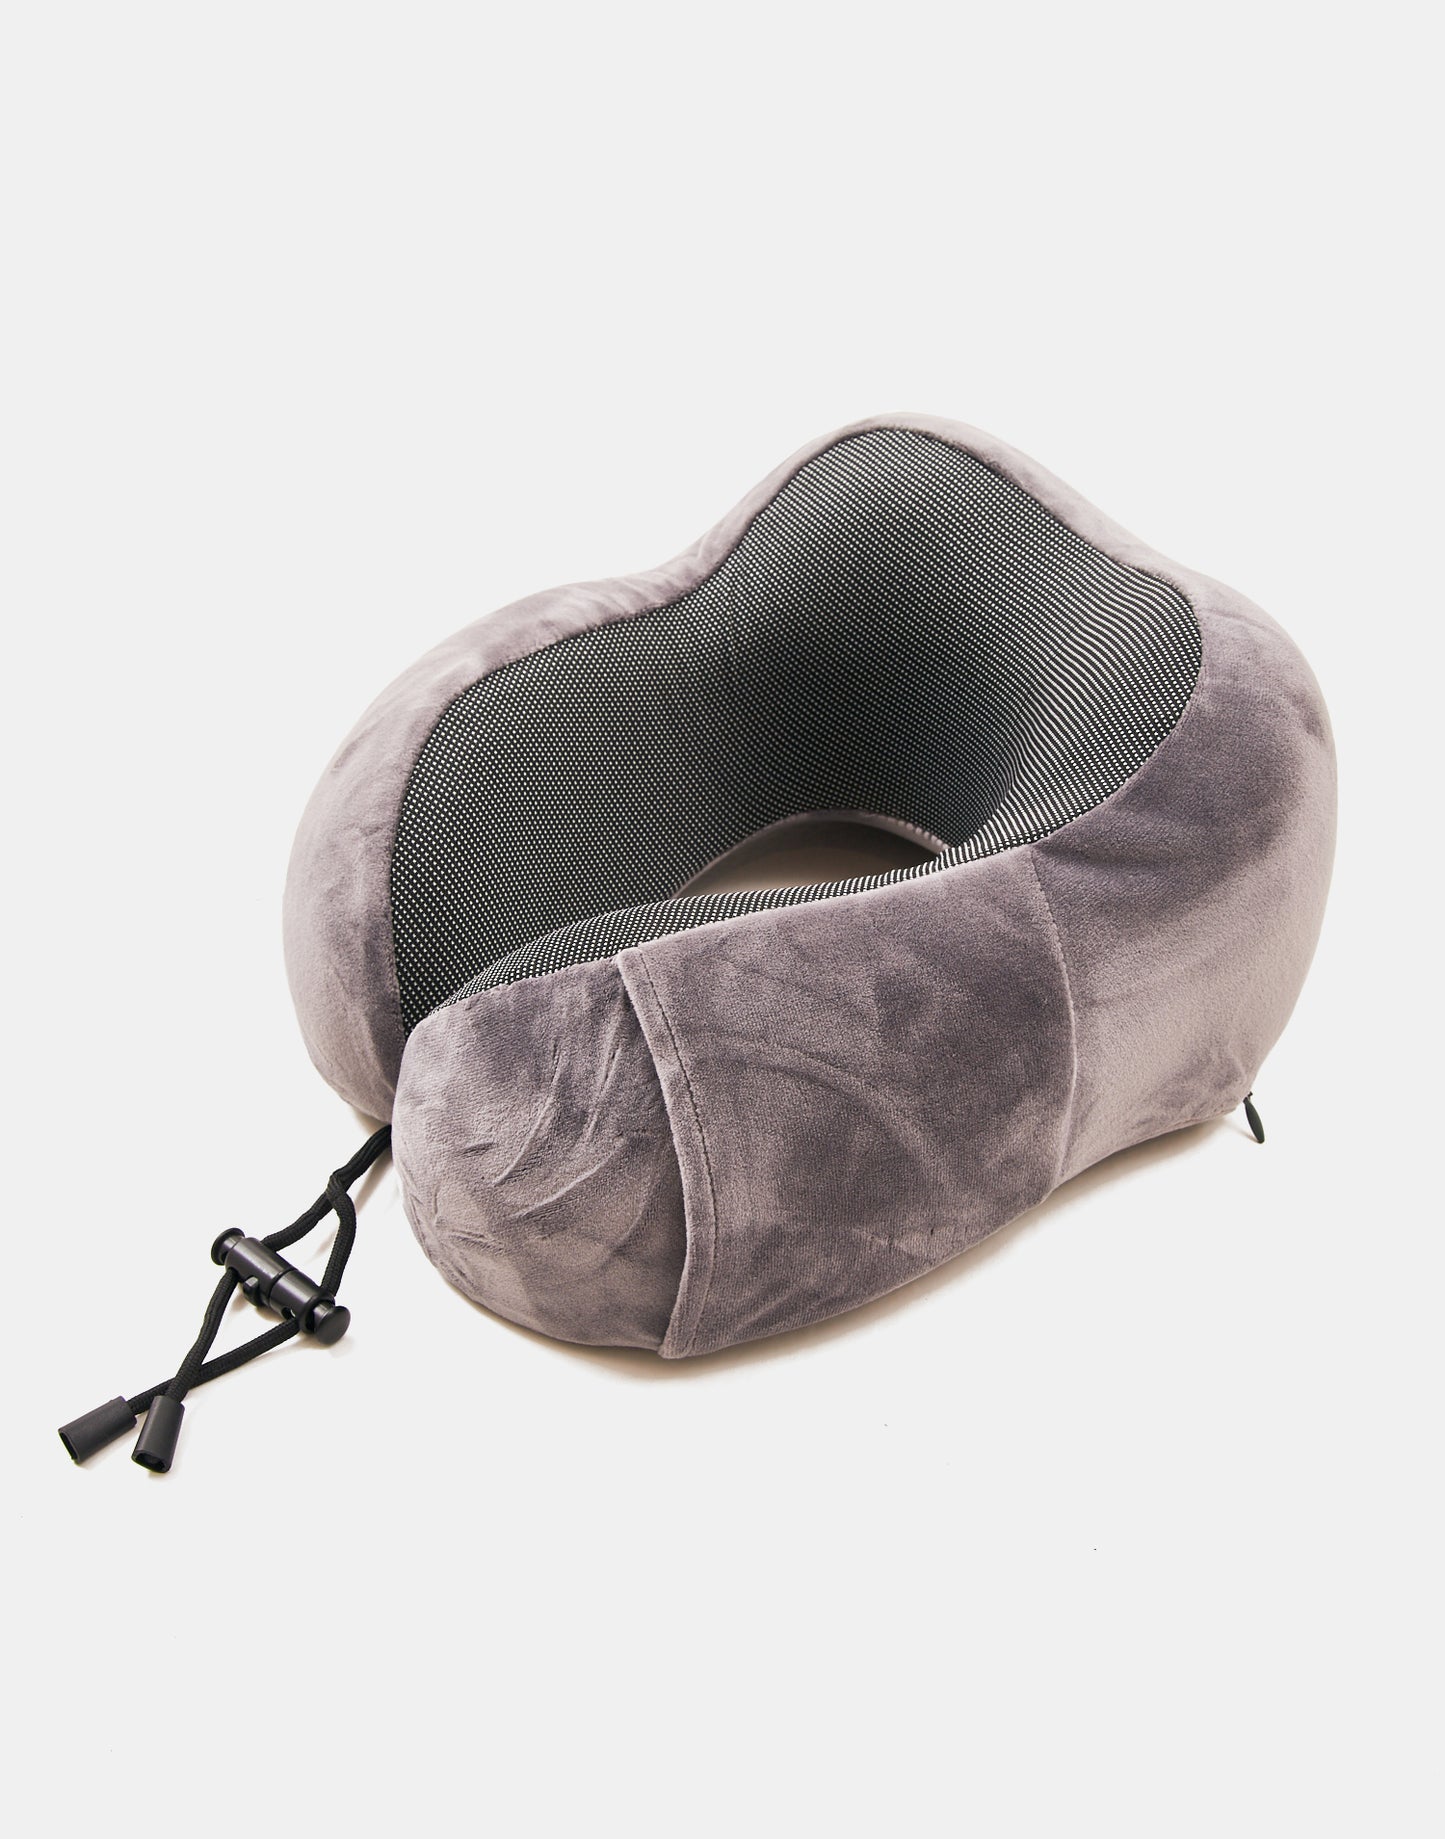 Travel kit with neck pillow